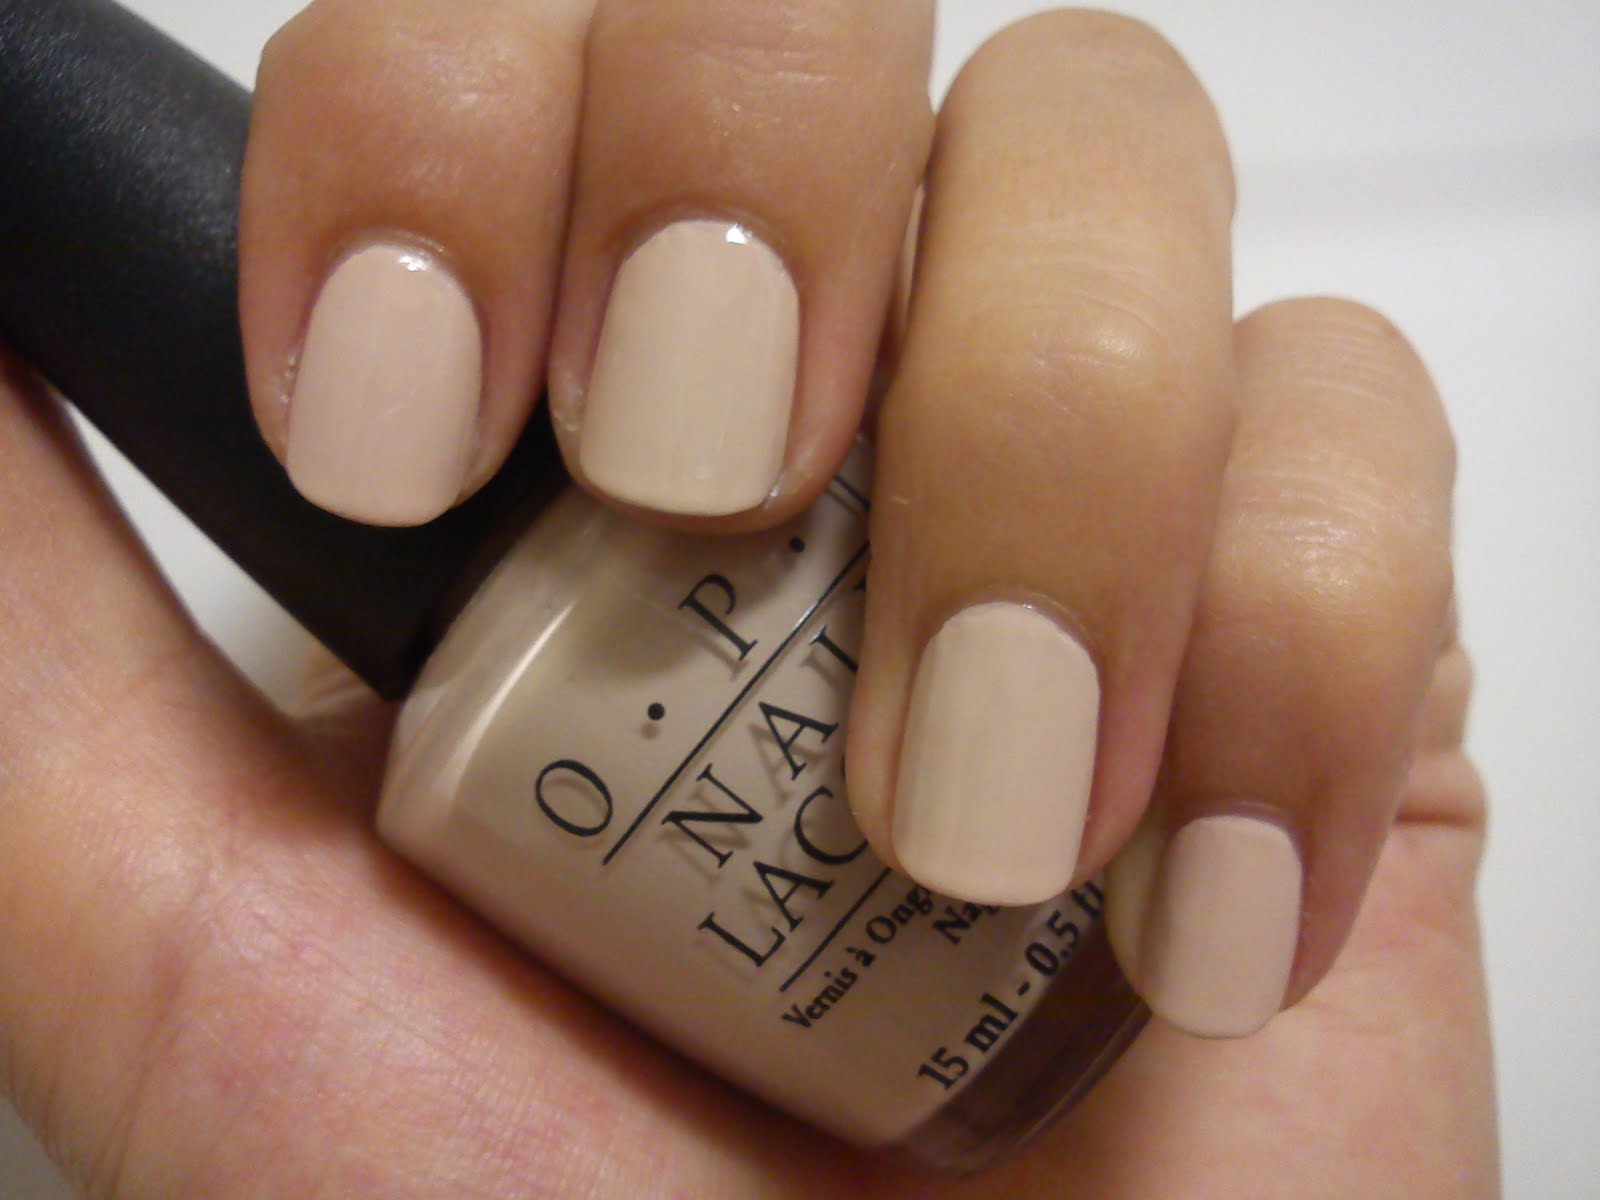 OPI Nail Lacquer, Samoan Sand - wide 2